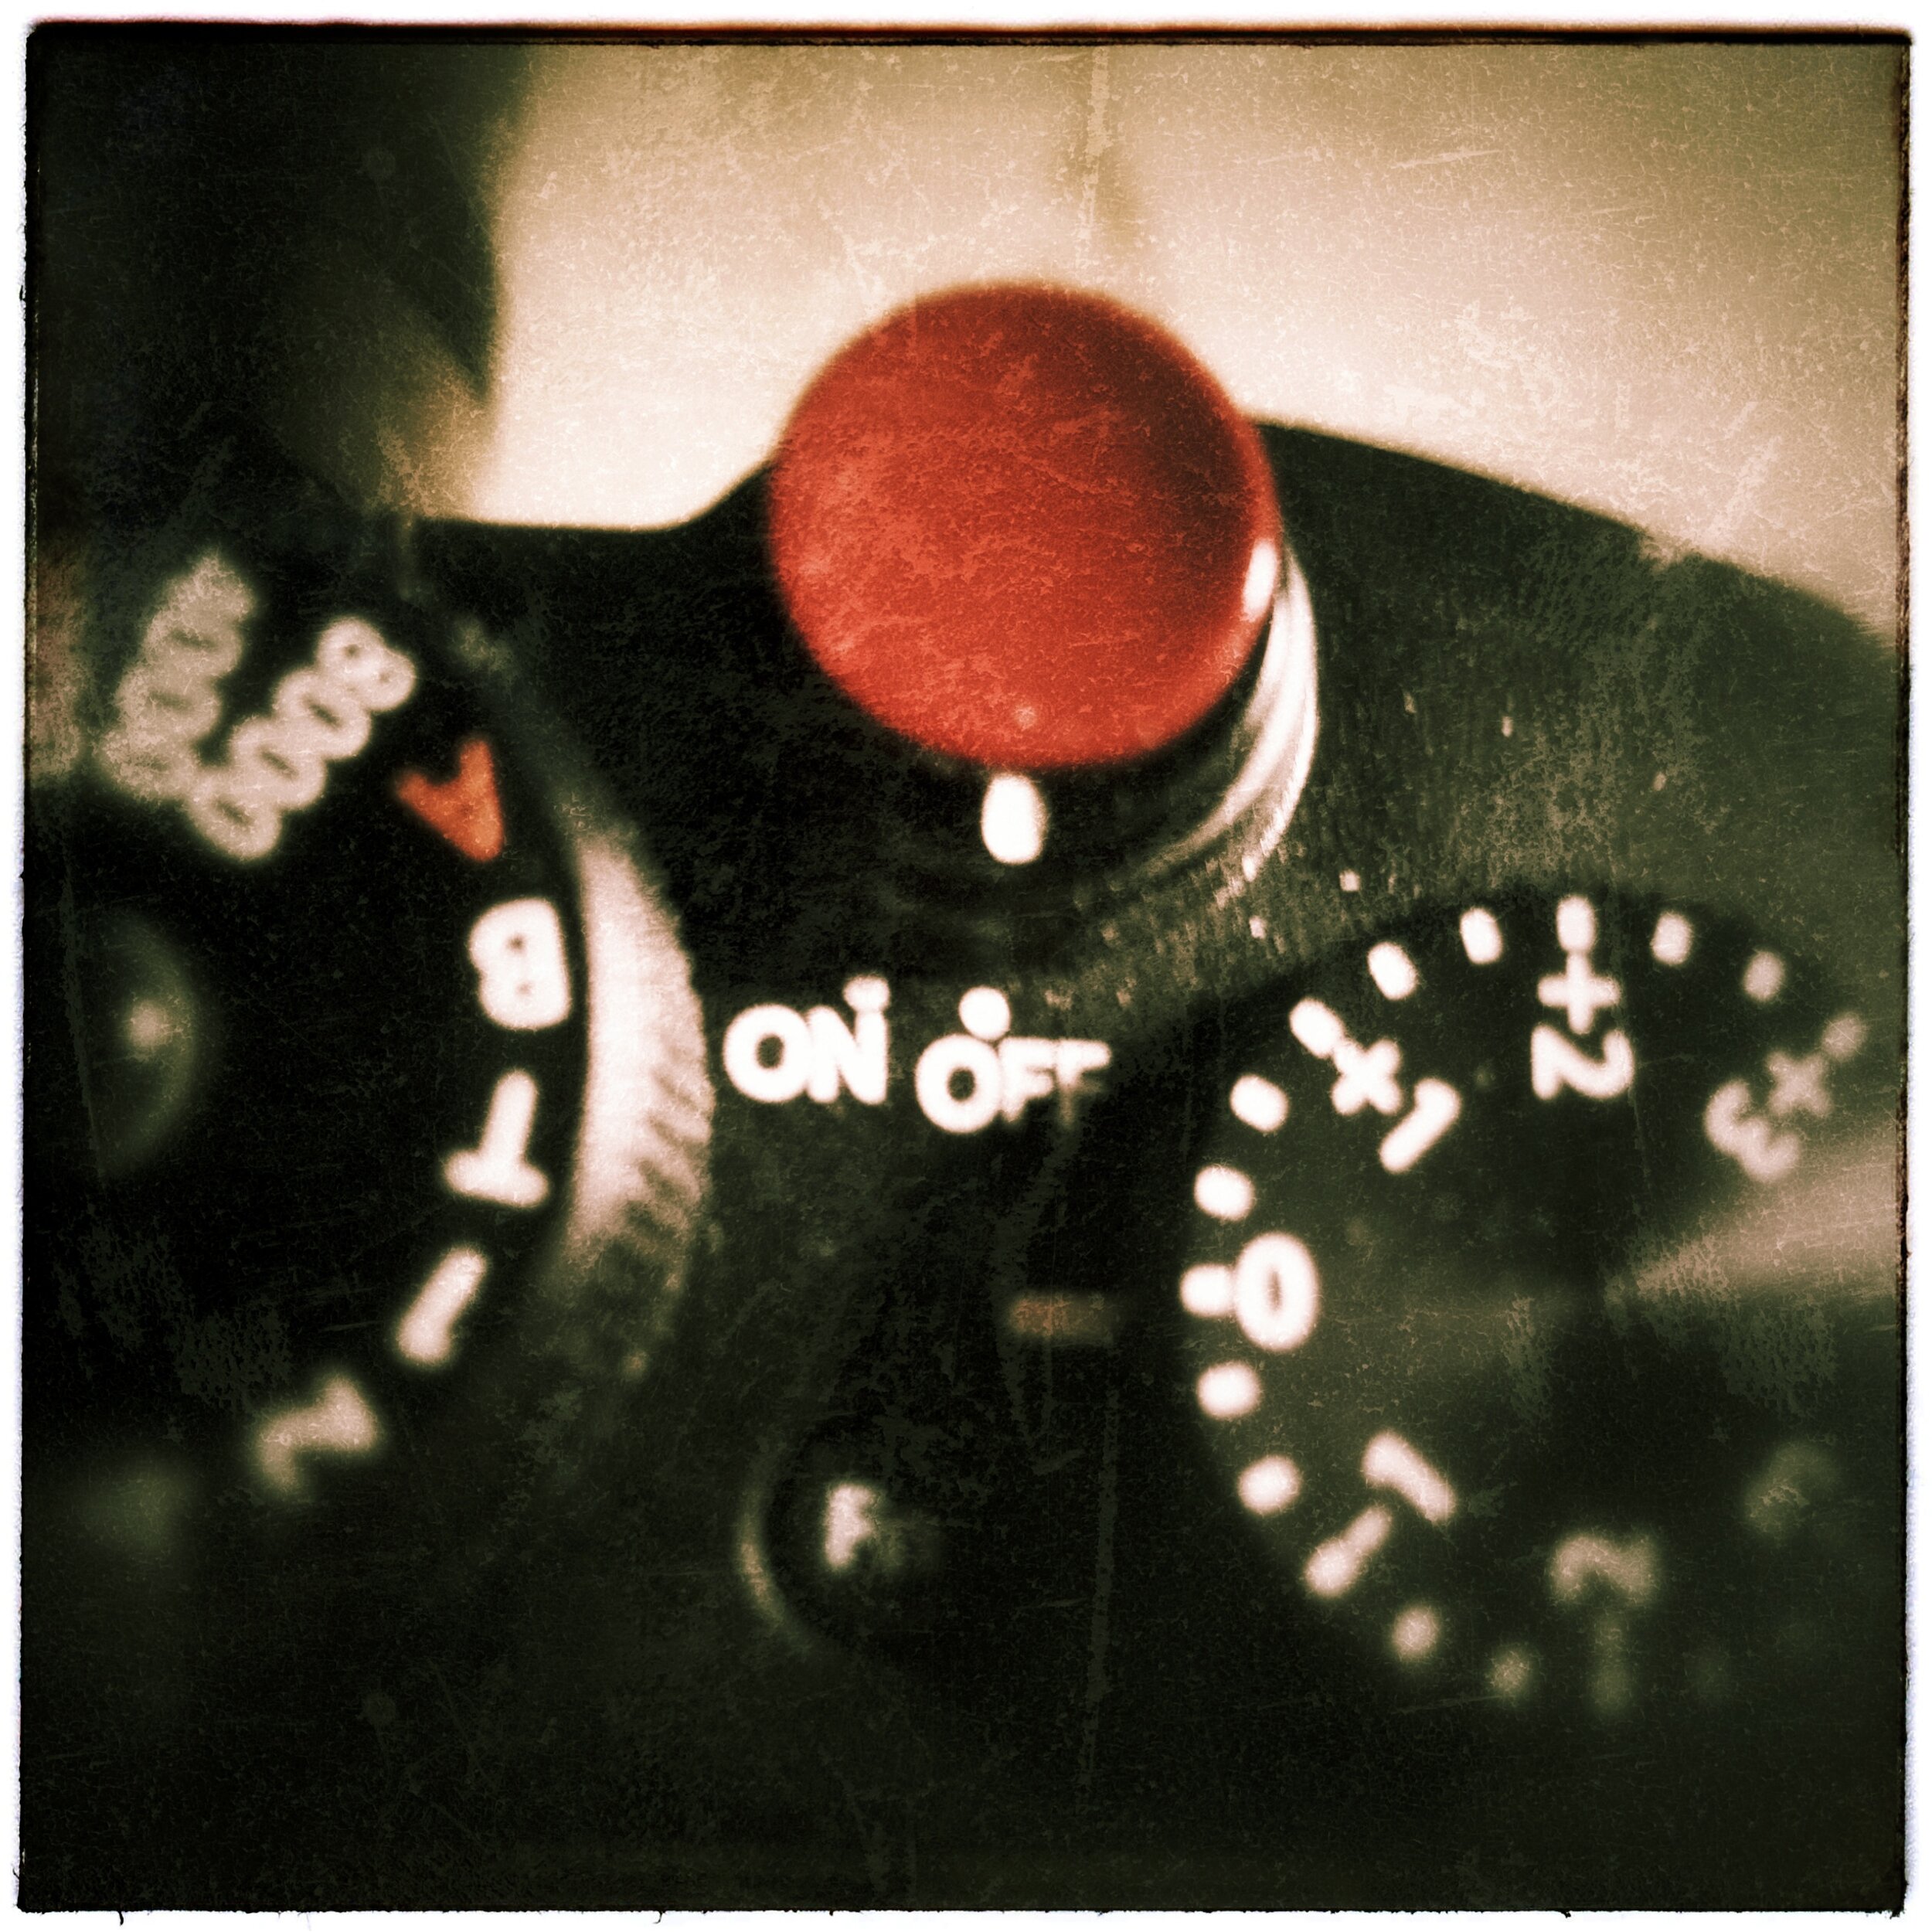 Day 64 - March 4: Beware the red button!